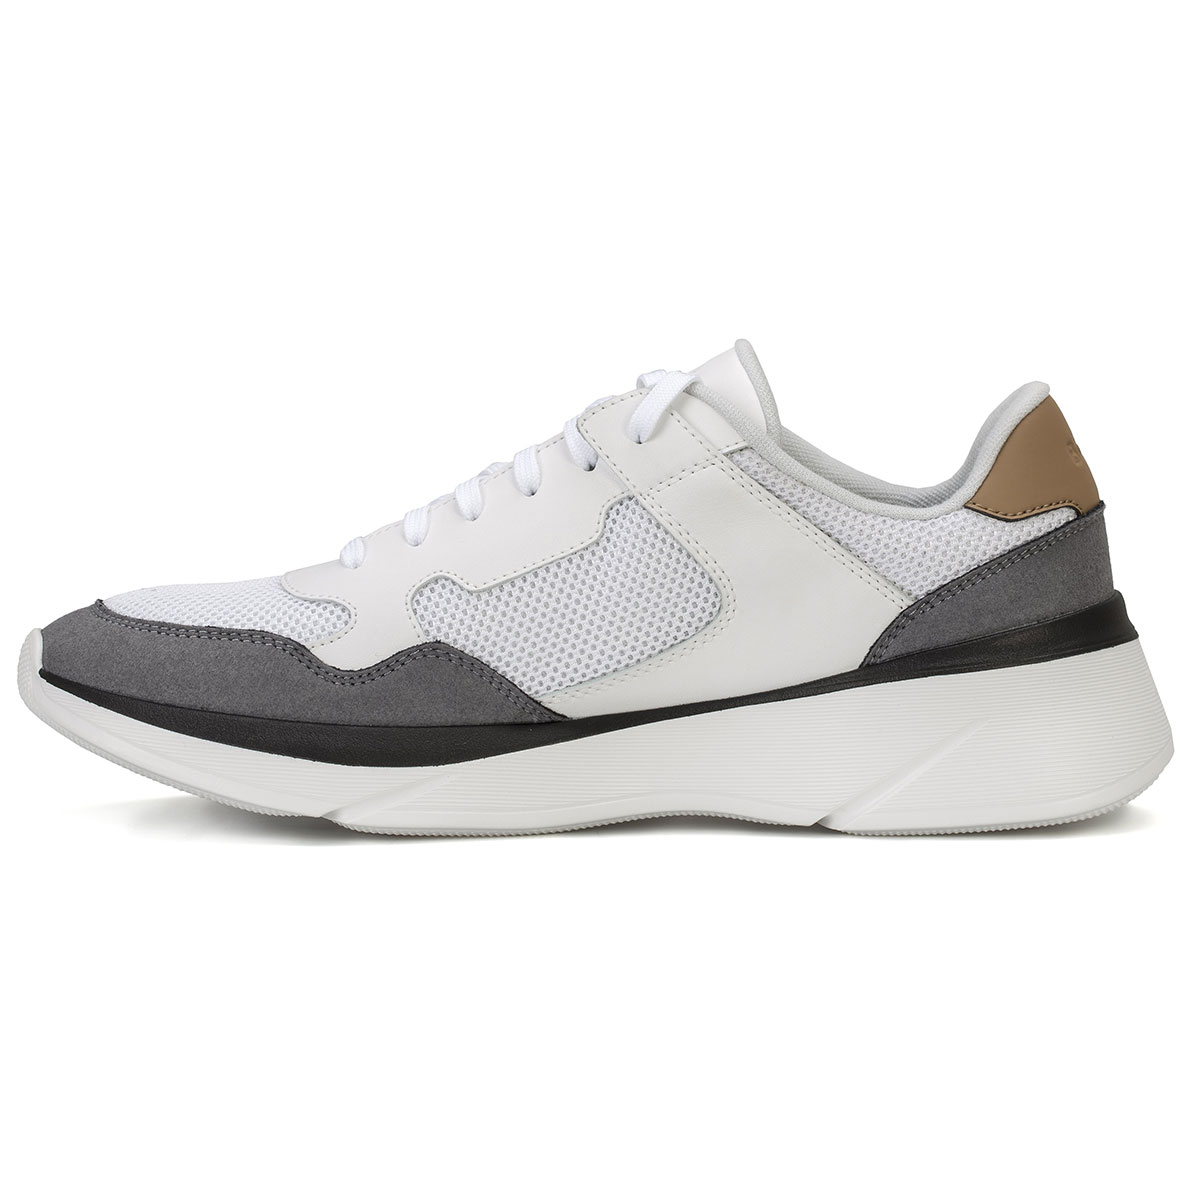 Hugo Boss Men's Dean Running Style Golf Trainers from american golf